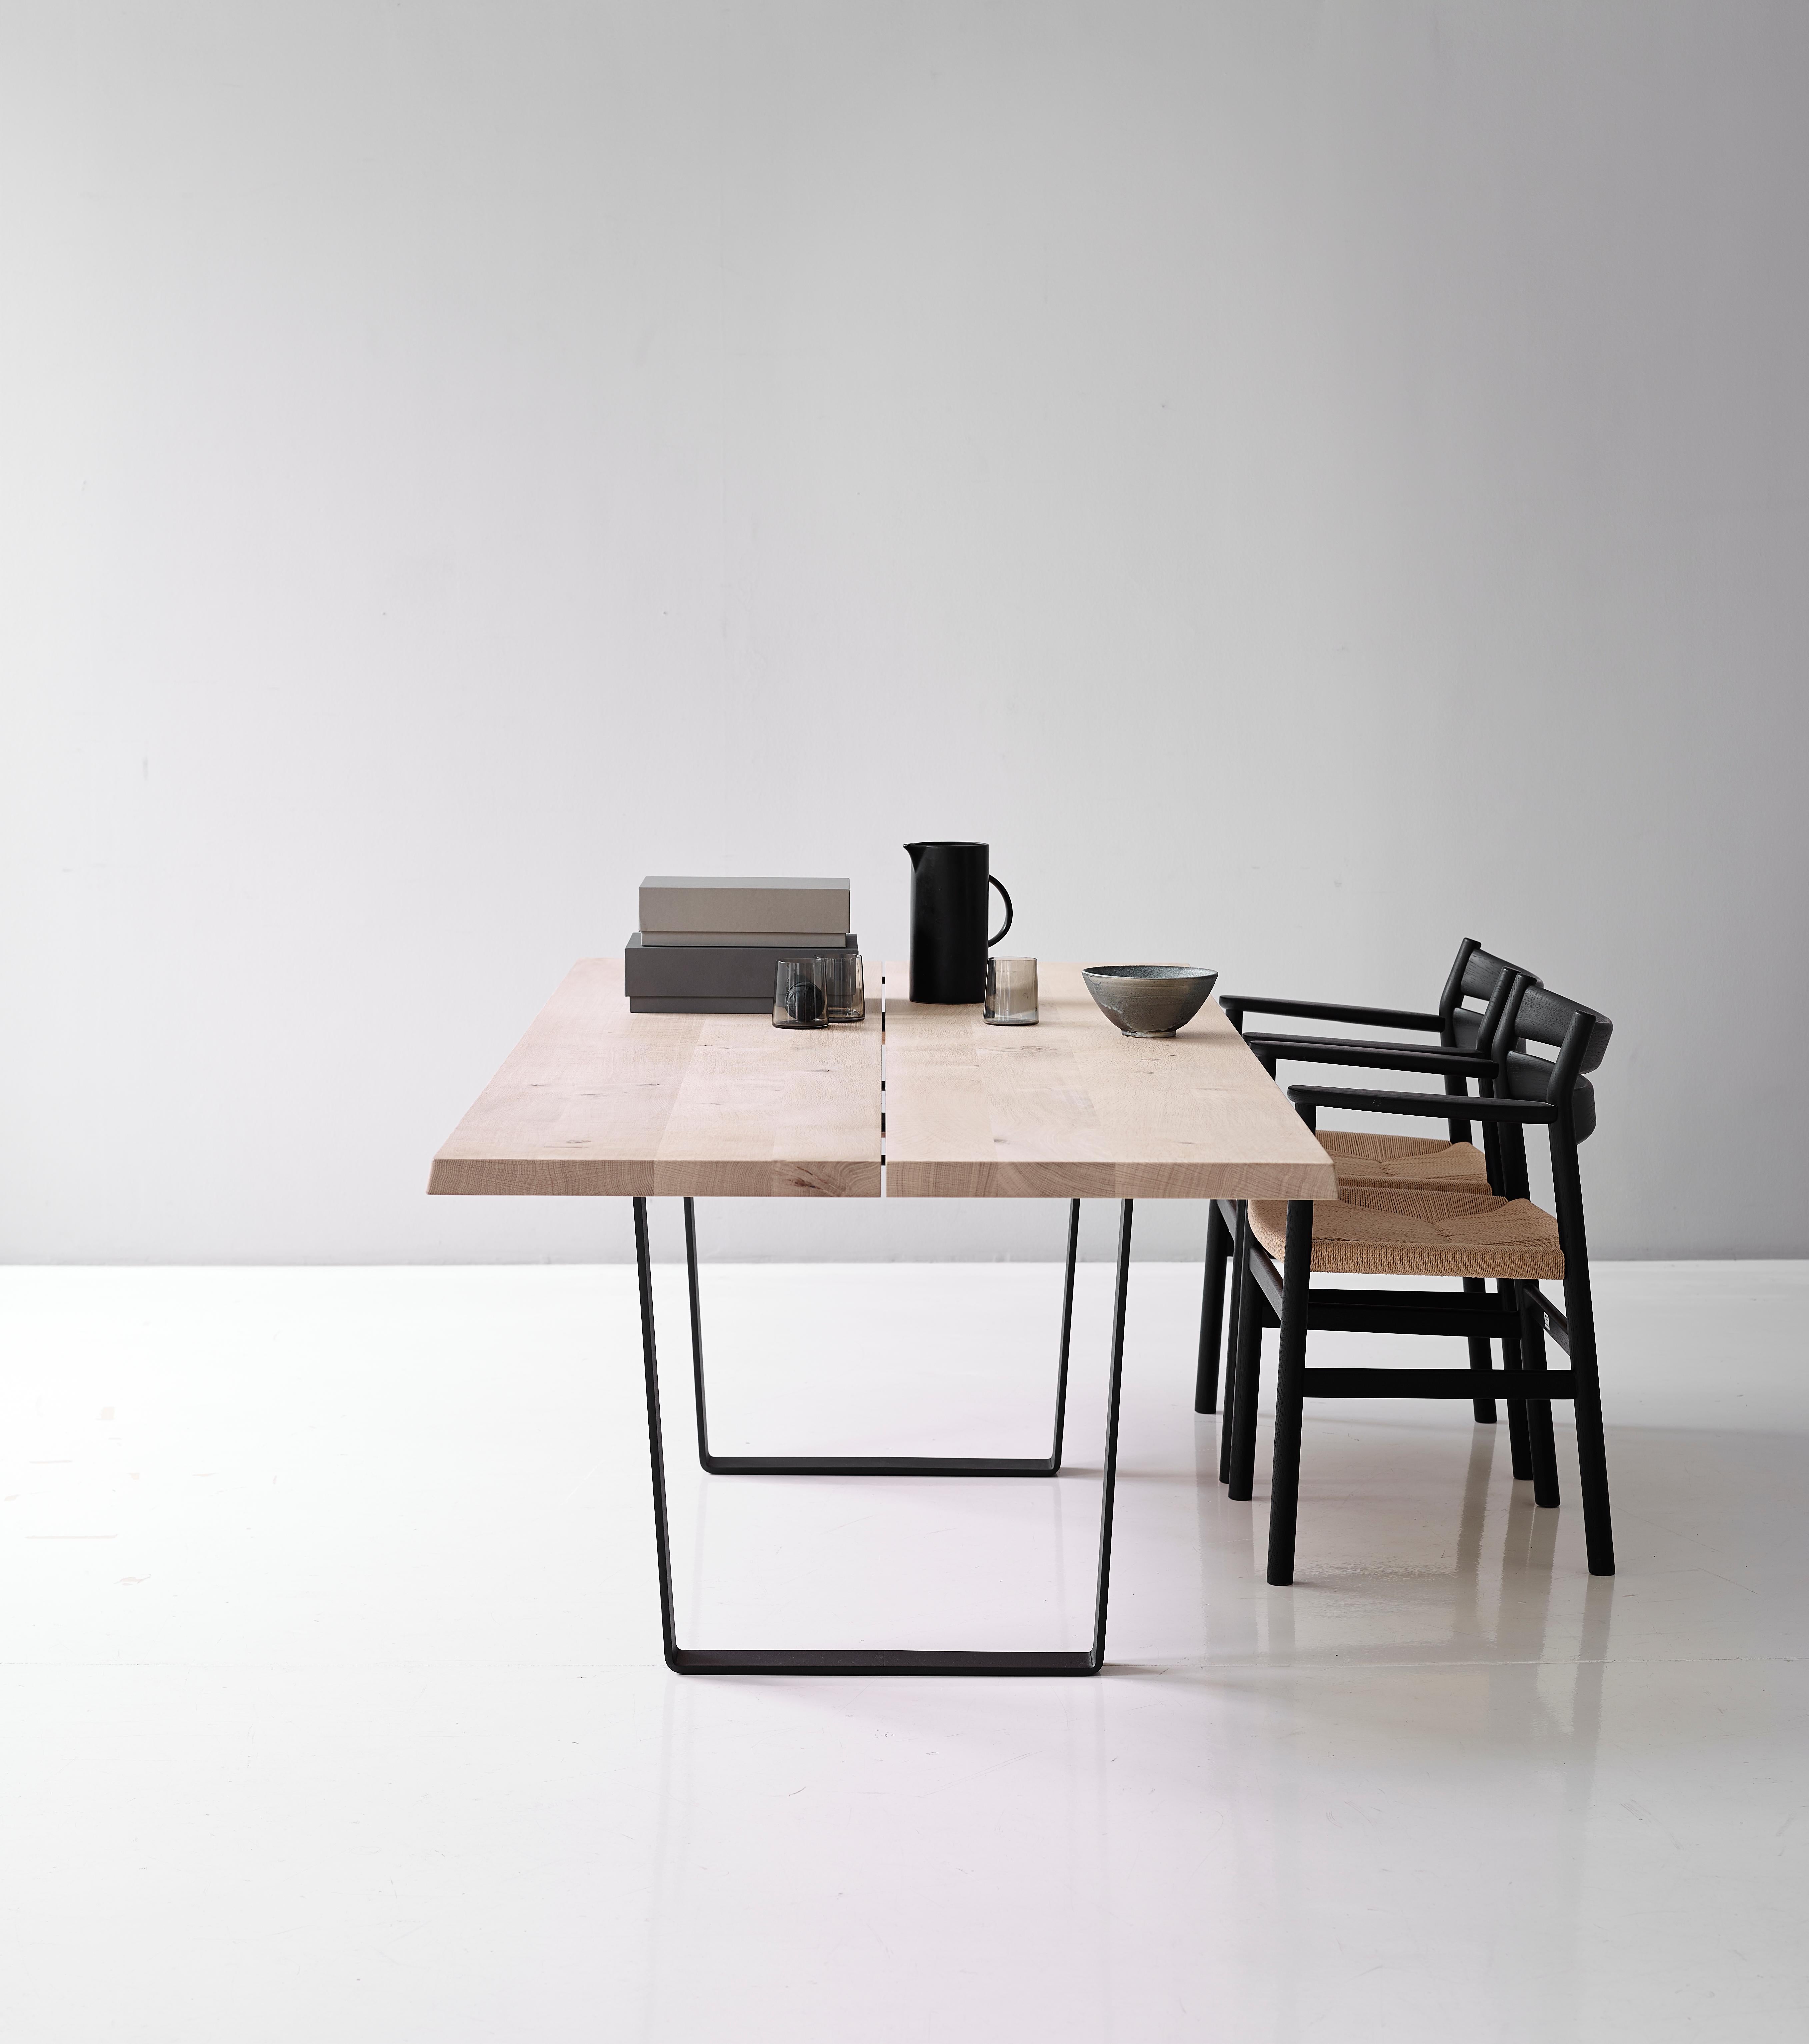 Lowlight dining table, rectangular, 180 cm

Solid wood tabletop and black powder coated steel legs. 
Handmade in Denmark.

Measure: Height: 72 or 74 cm

Tabletop dimensions:
– 180 x 100 cm
– 200 x 100 cm
– 220 x 100 cm
– 240 x 100 cm
–